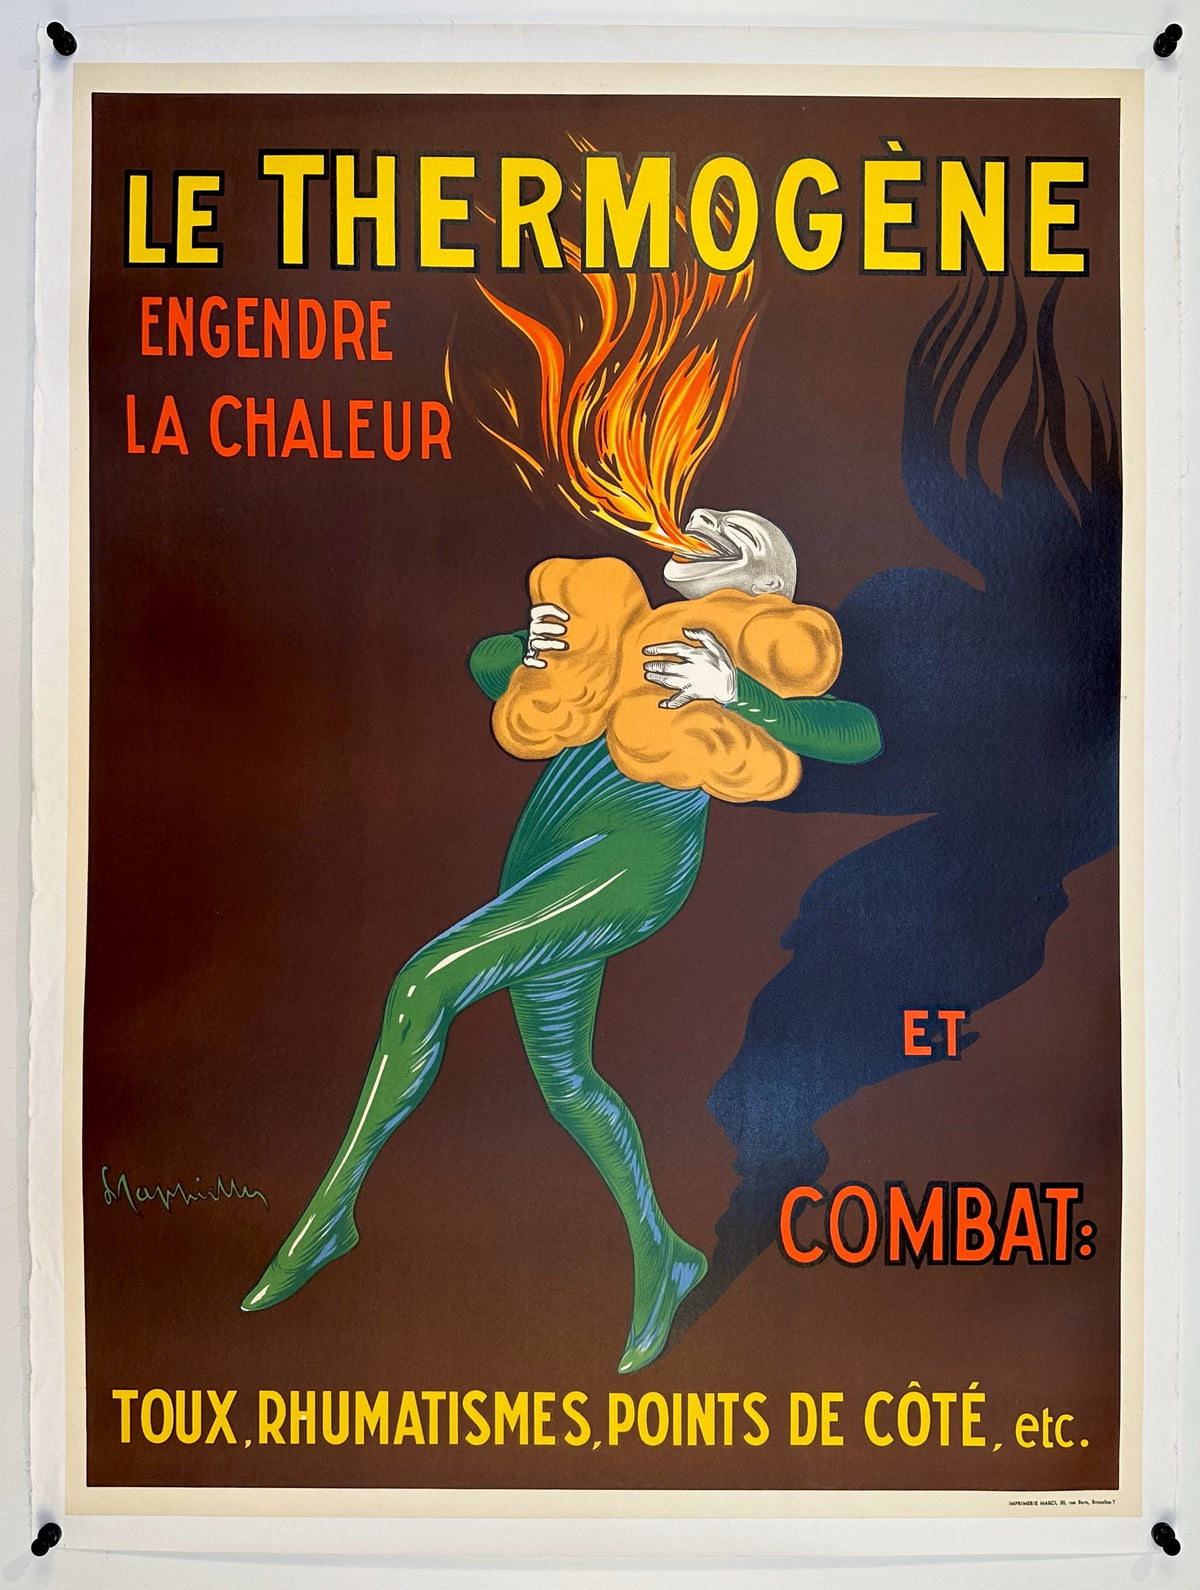 Le Thermogene by Leonetto Cappiello - Authentic Vintage Poster